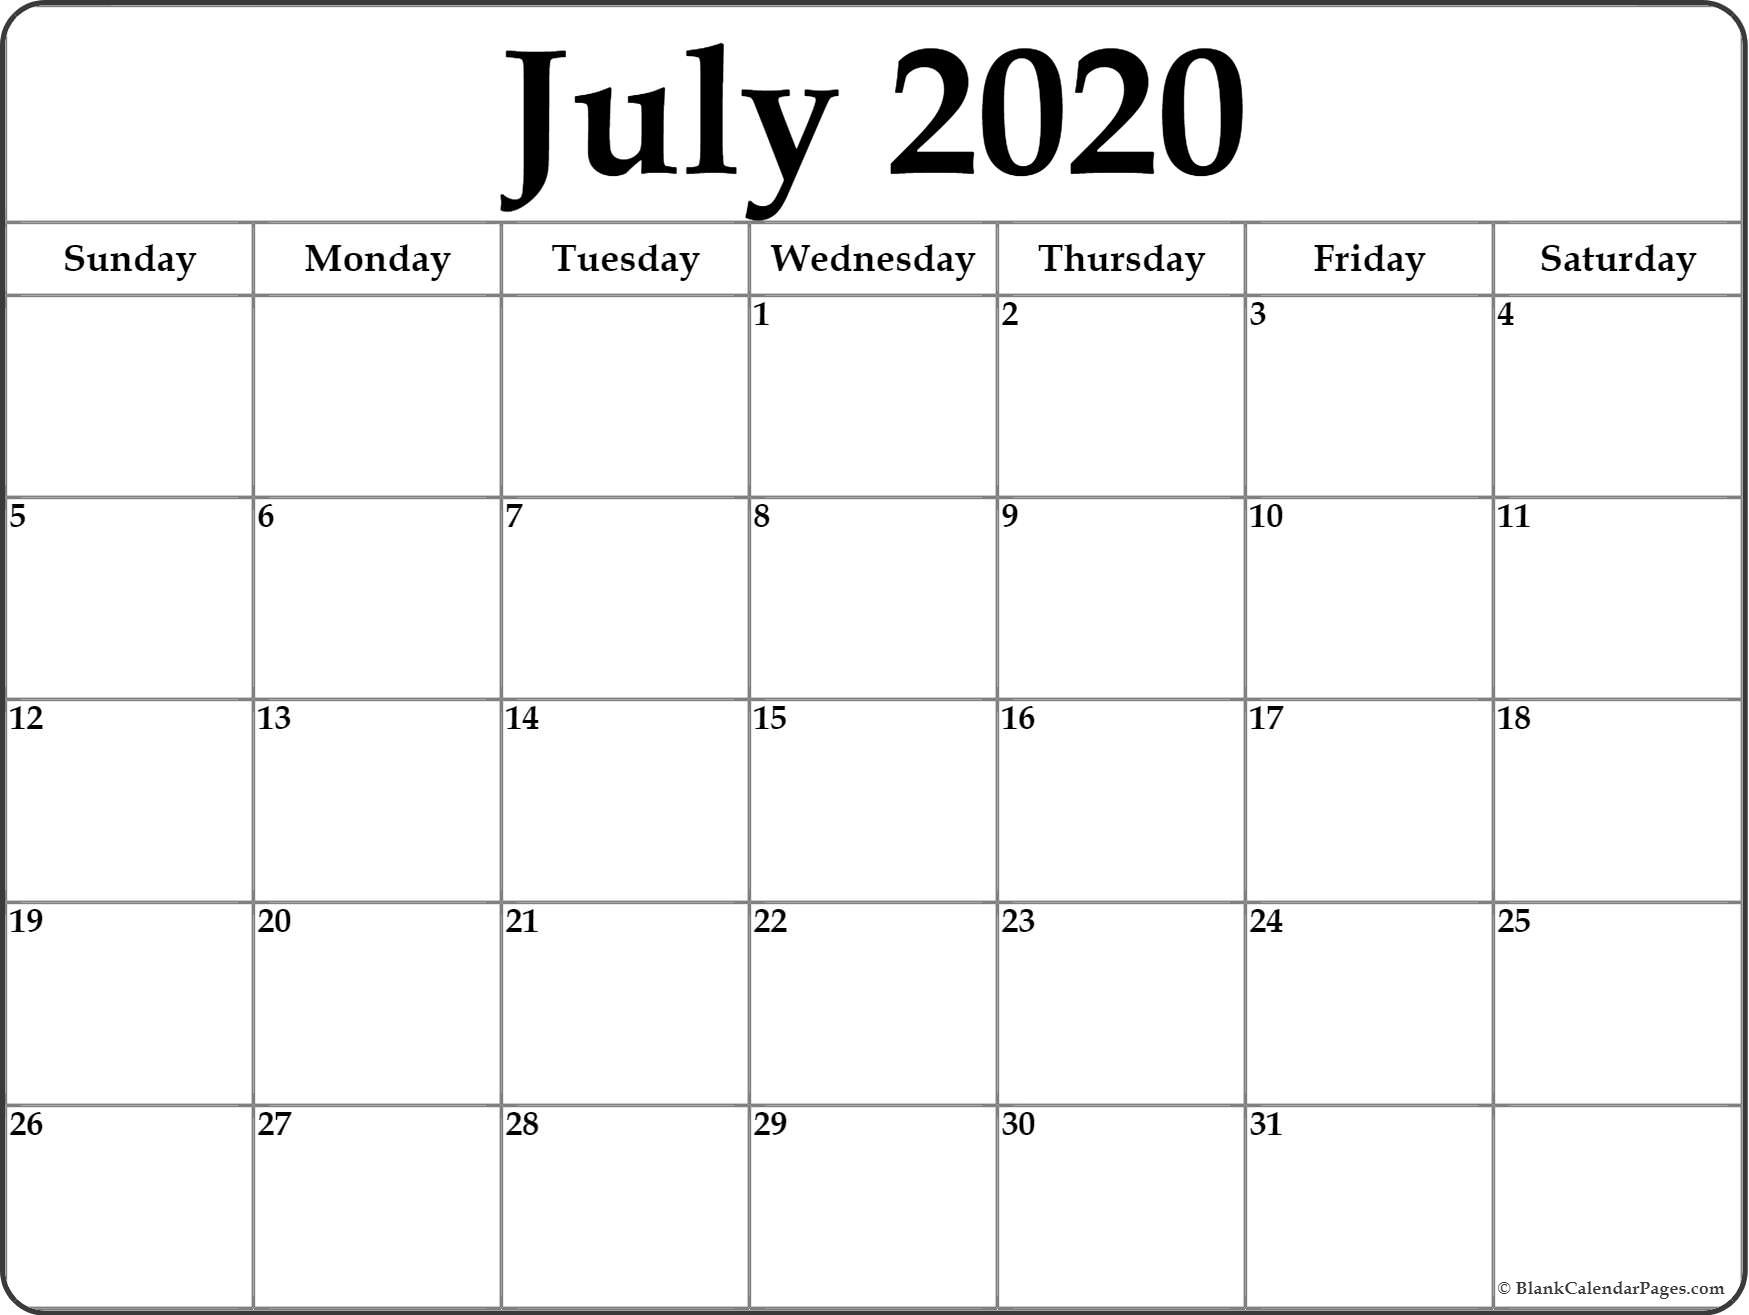 July 2020 Calendar | Free Printable Monthly Calendars-July/august Calendar 2020 Monthly